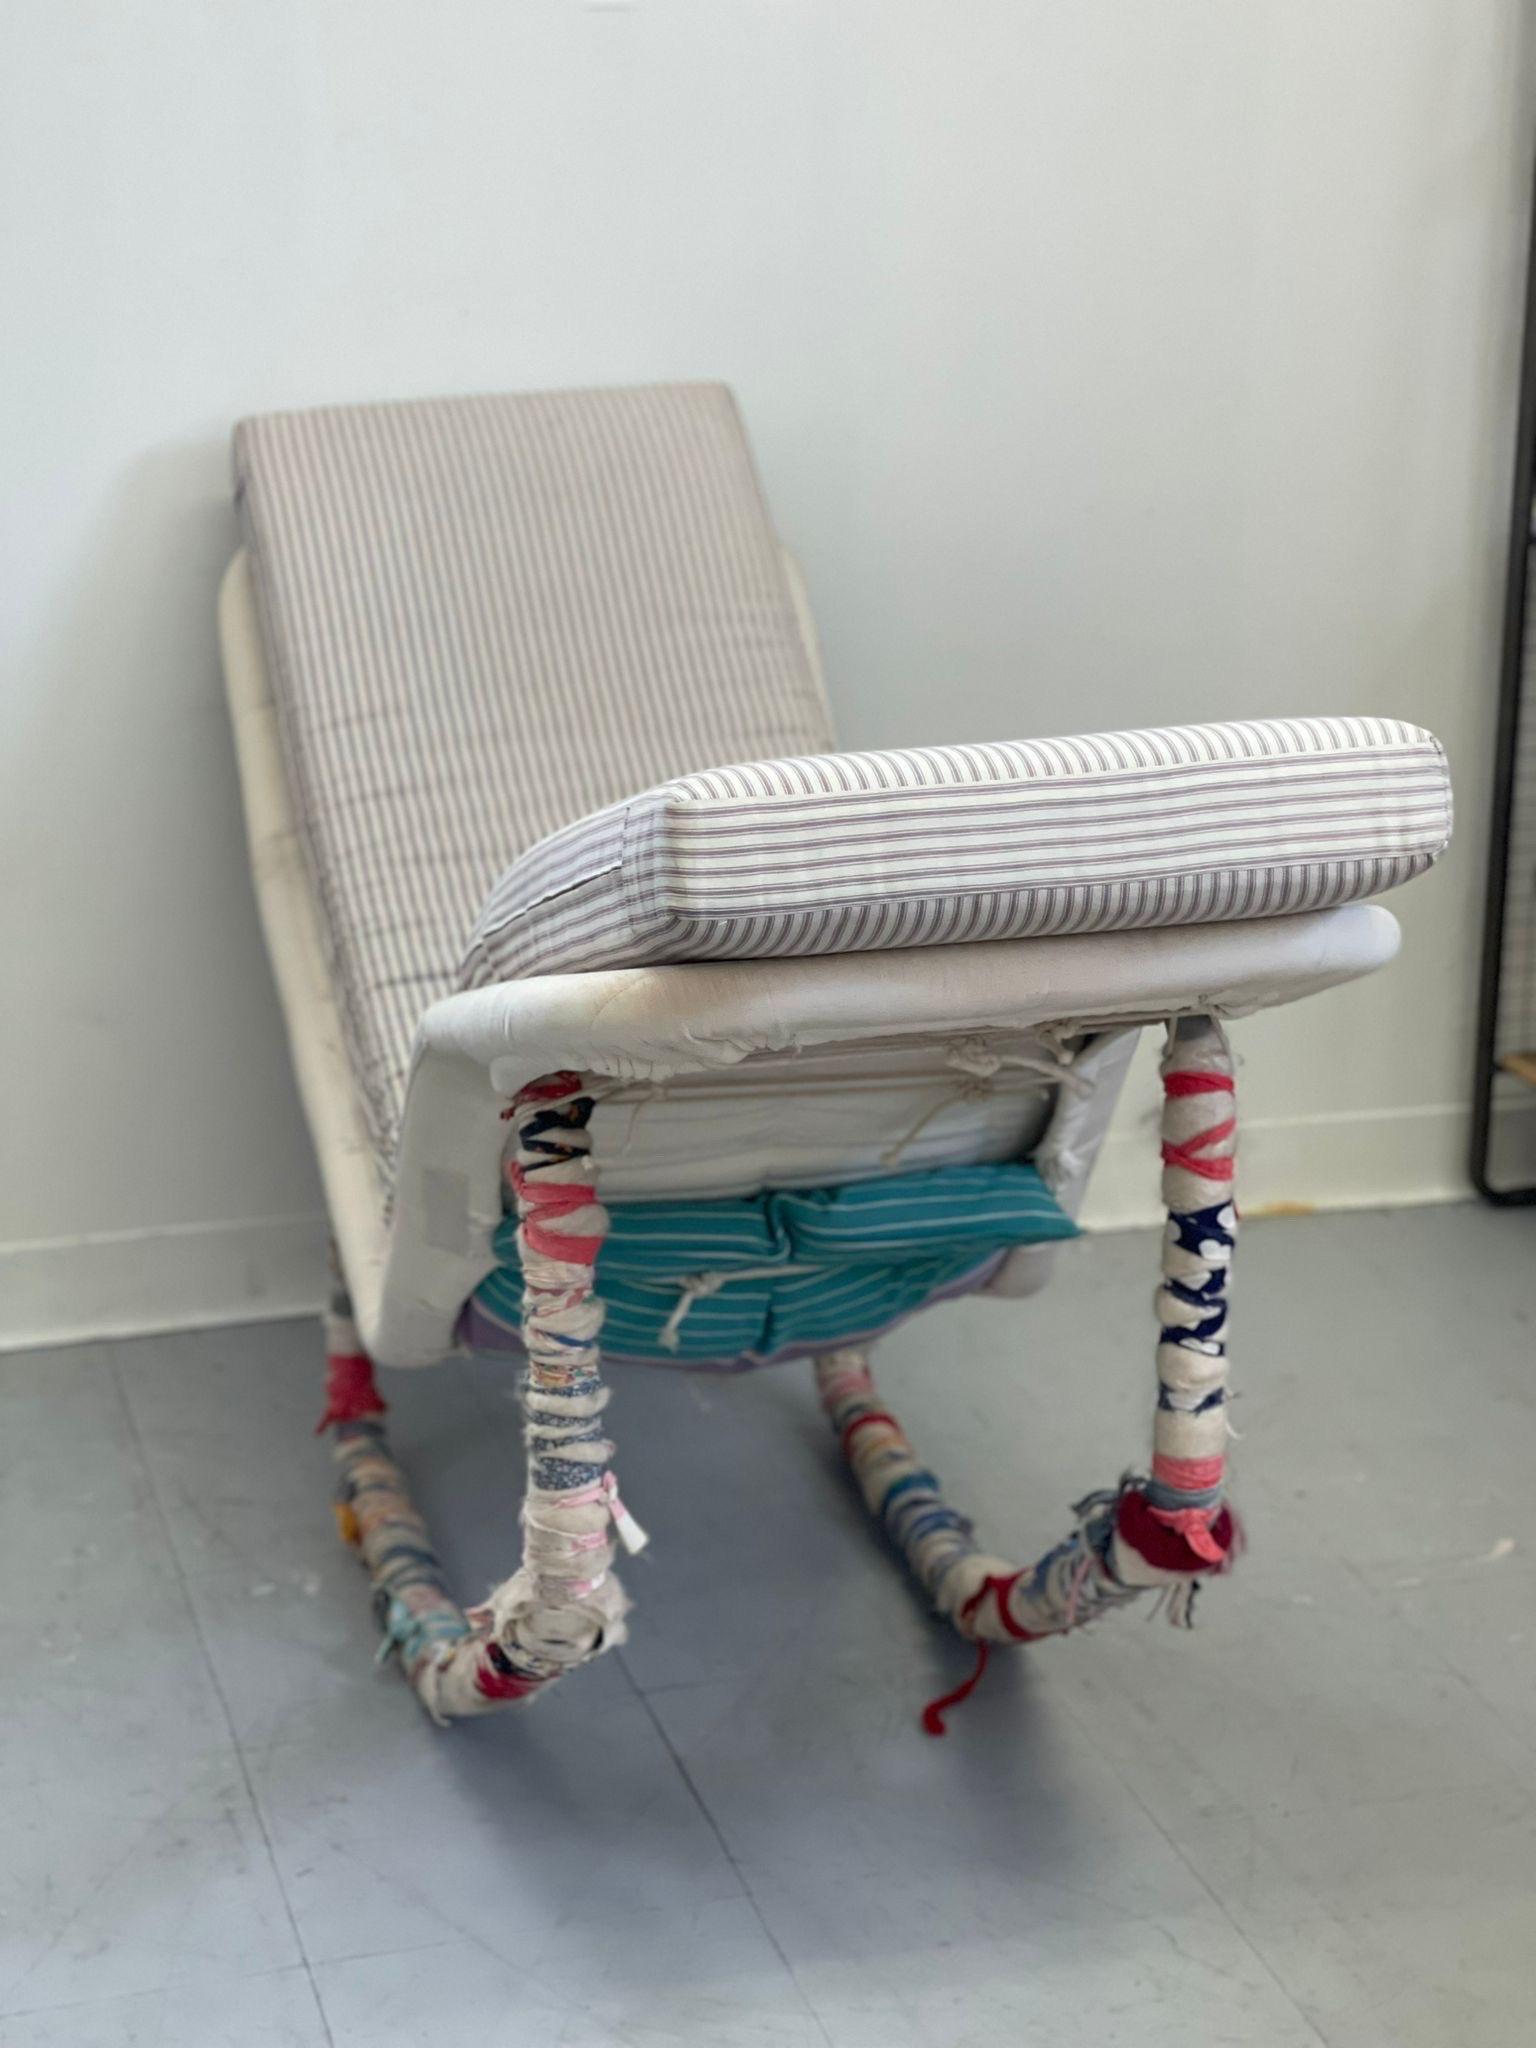 Edgar Bartolucci Rocking Chair Wrapped in Cloth by a Separate Artist. The Striped Padding is Removable. Features a weight on one End to Assist with Racking. No Maker’s Mark. Vintage Condition Consistent with Age as Pictured.

Dimensions. 60 W ; 20 D